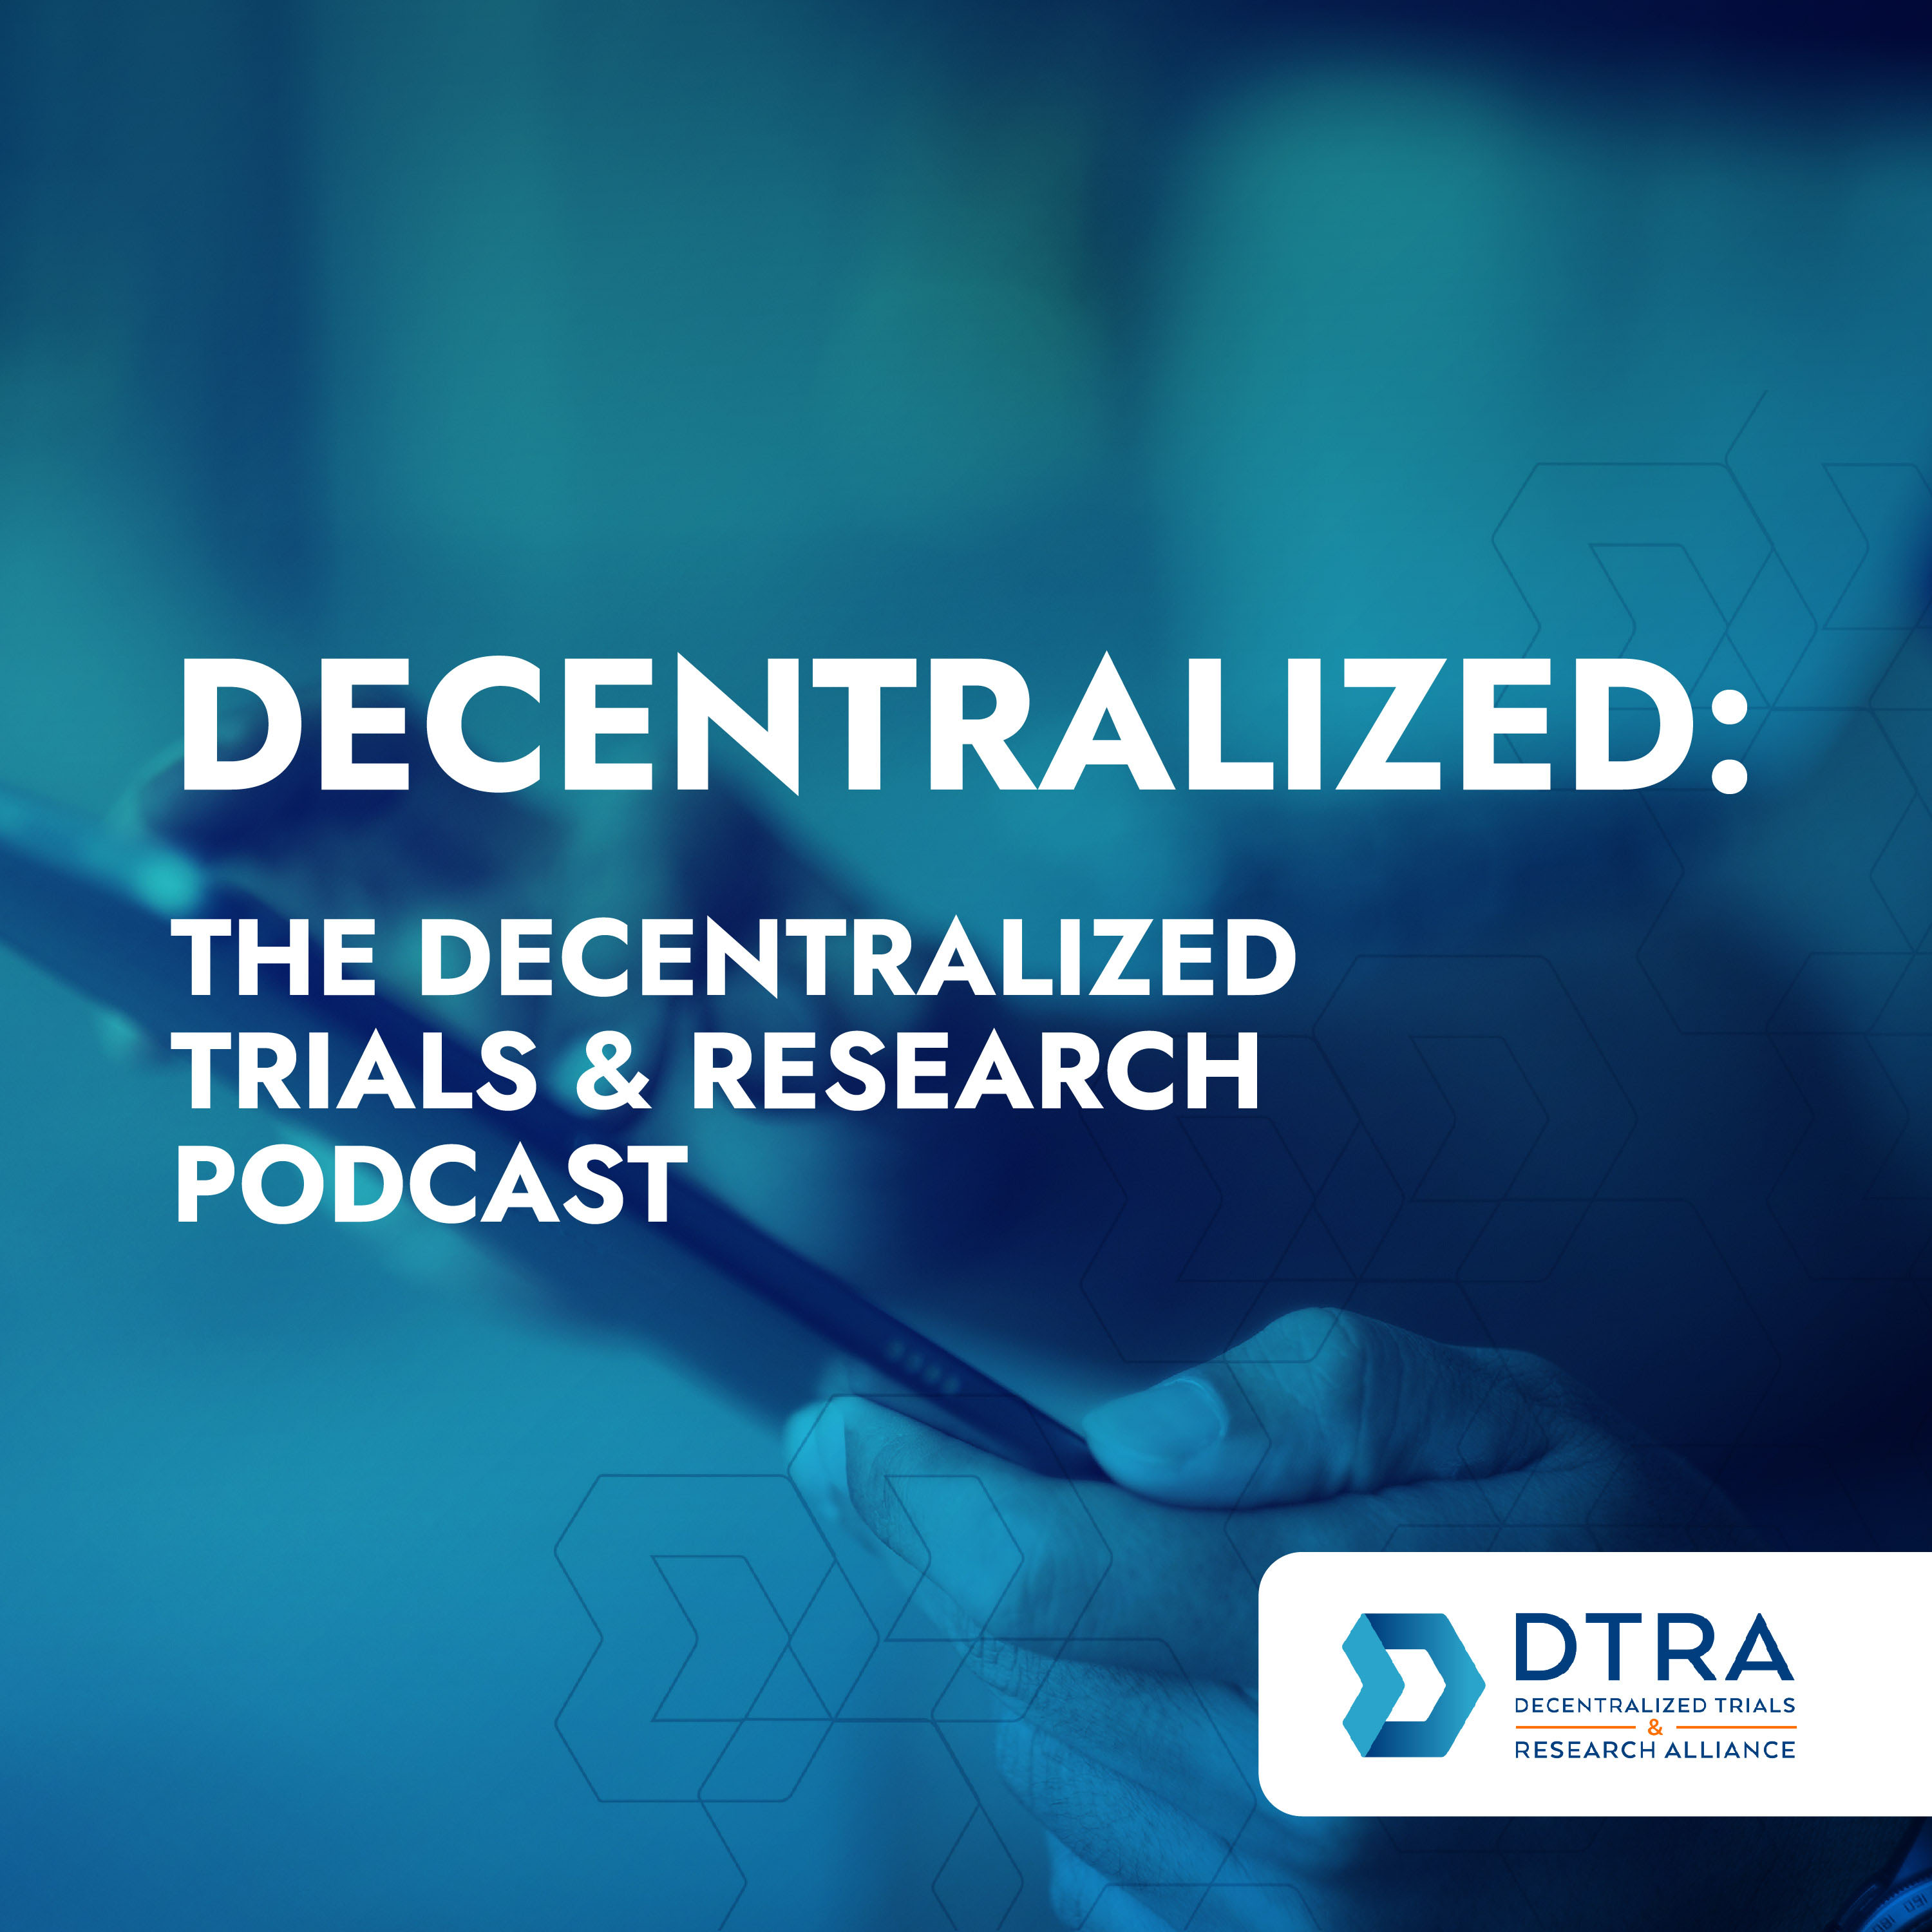 Welcome to Decentralized: The Decentralized Trials & Research Podcast